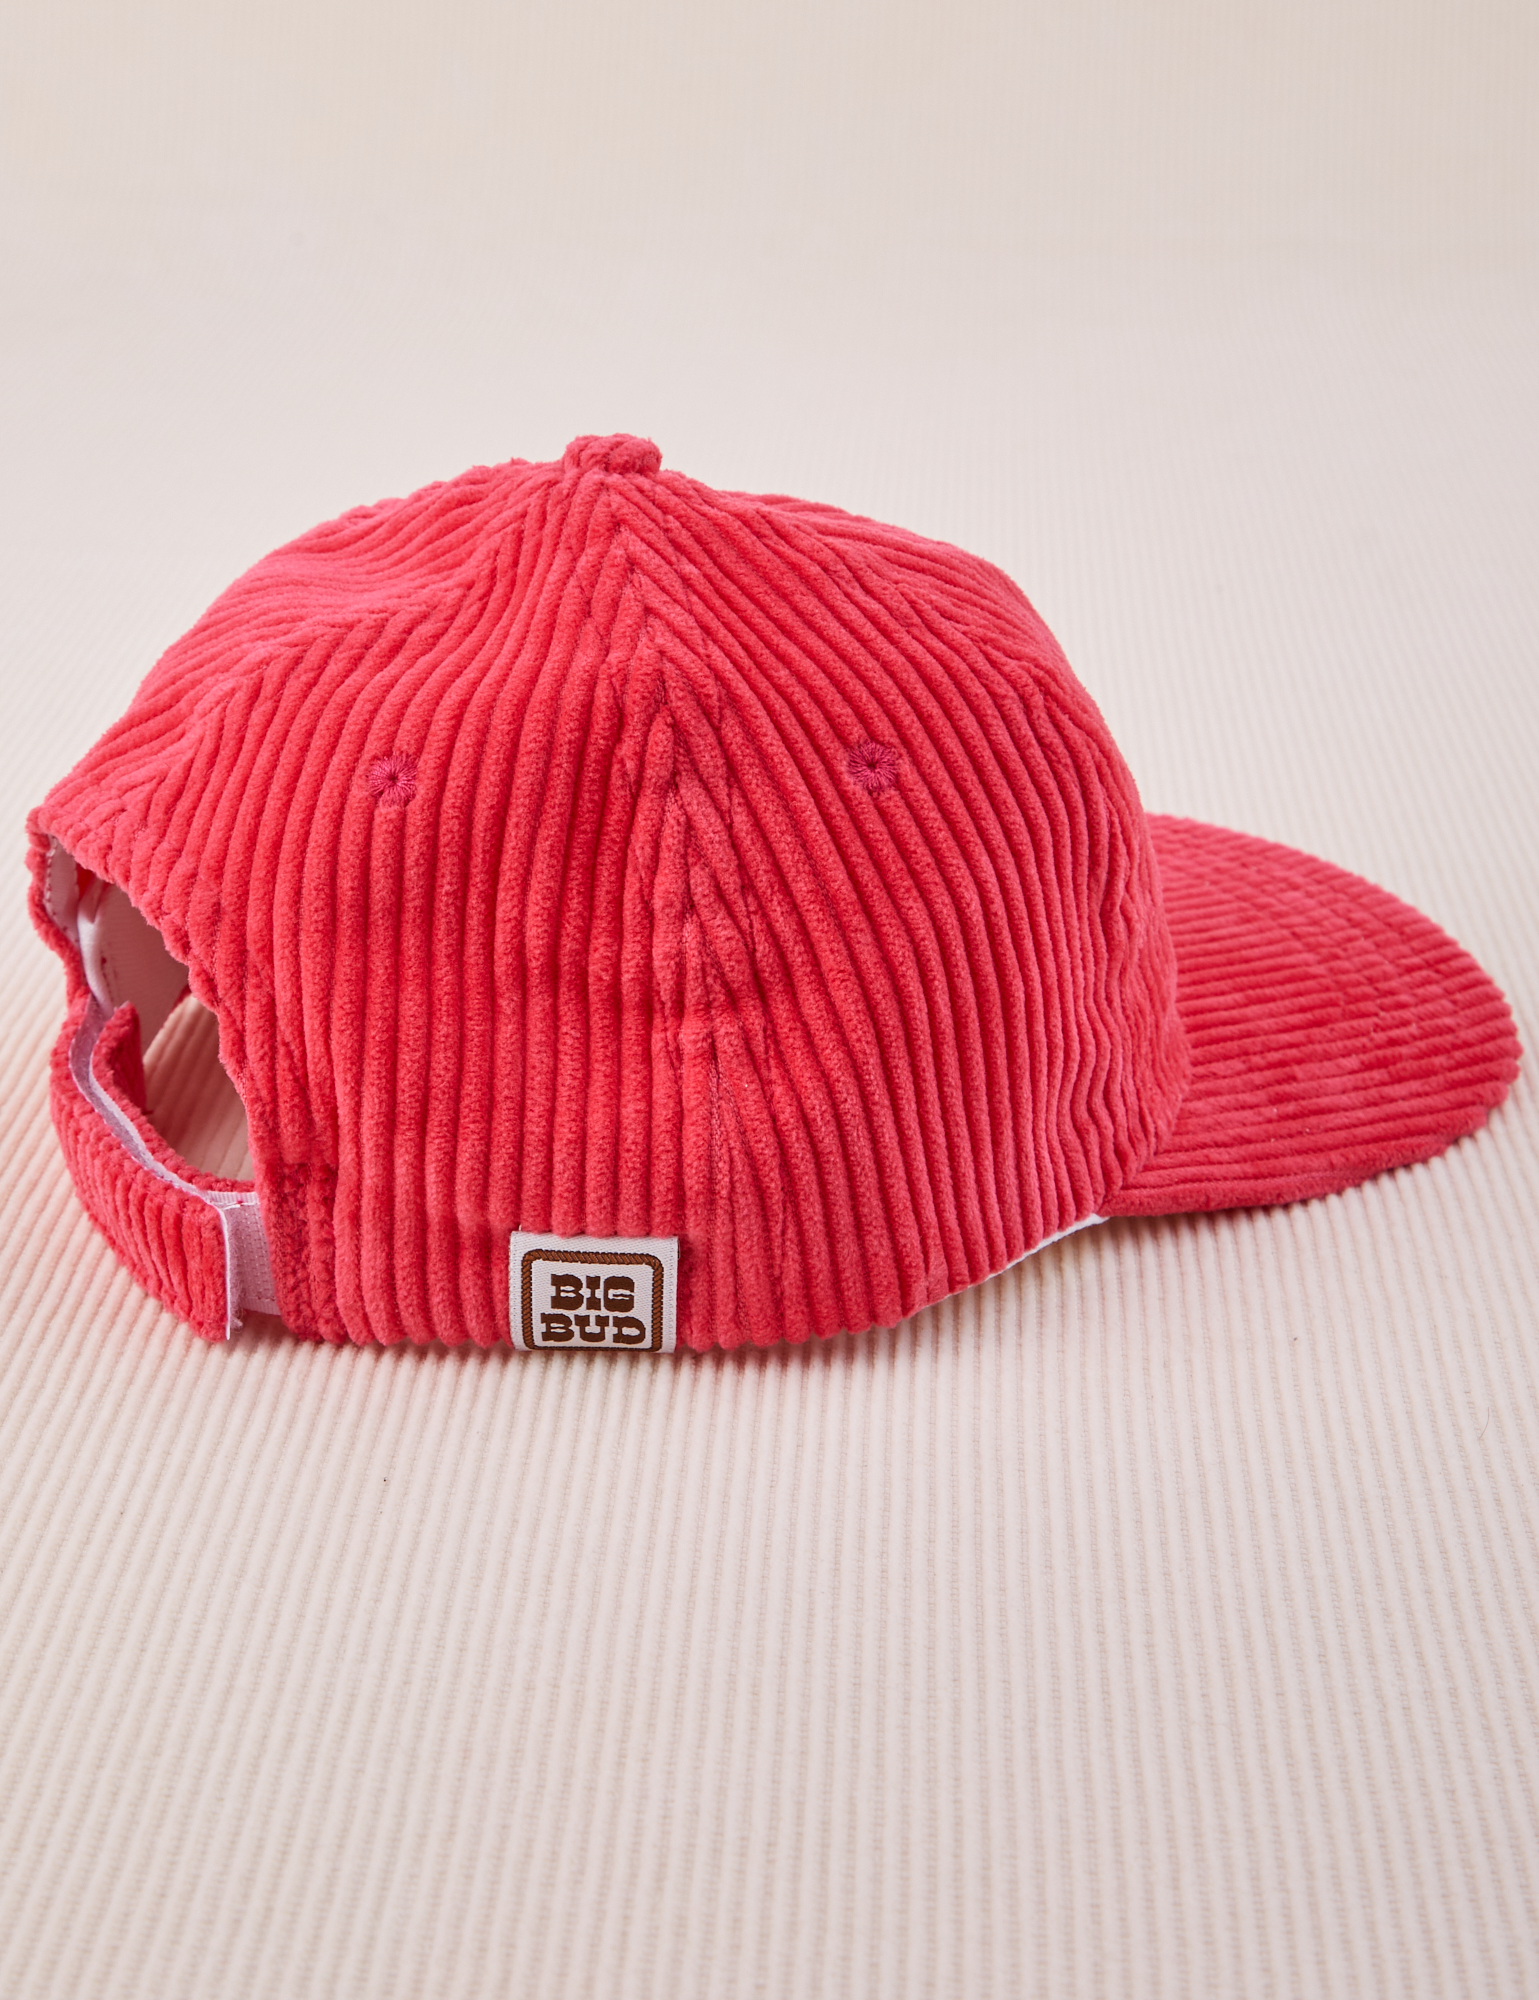 Side view of Dugout Corduroy Hat in Hot Pink. Big Bud label sewn on the side.